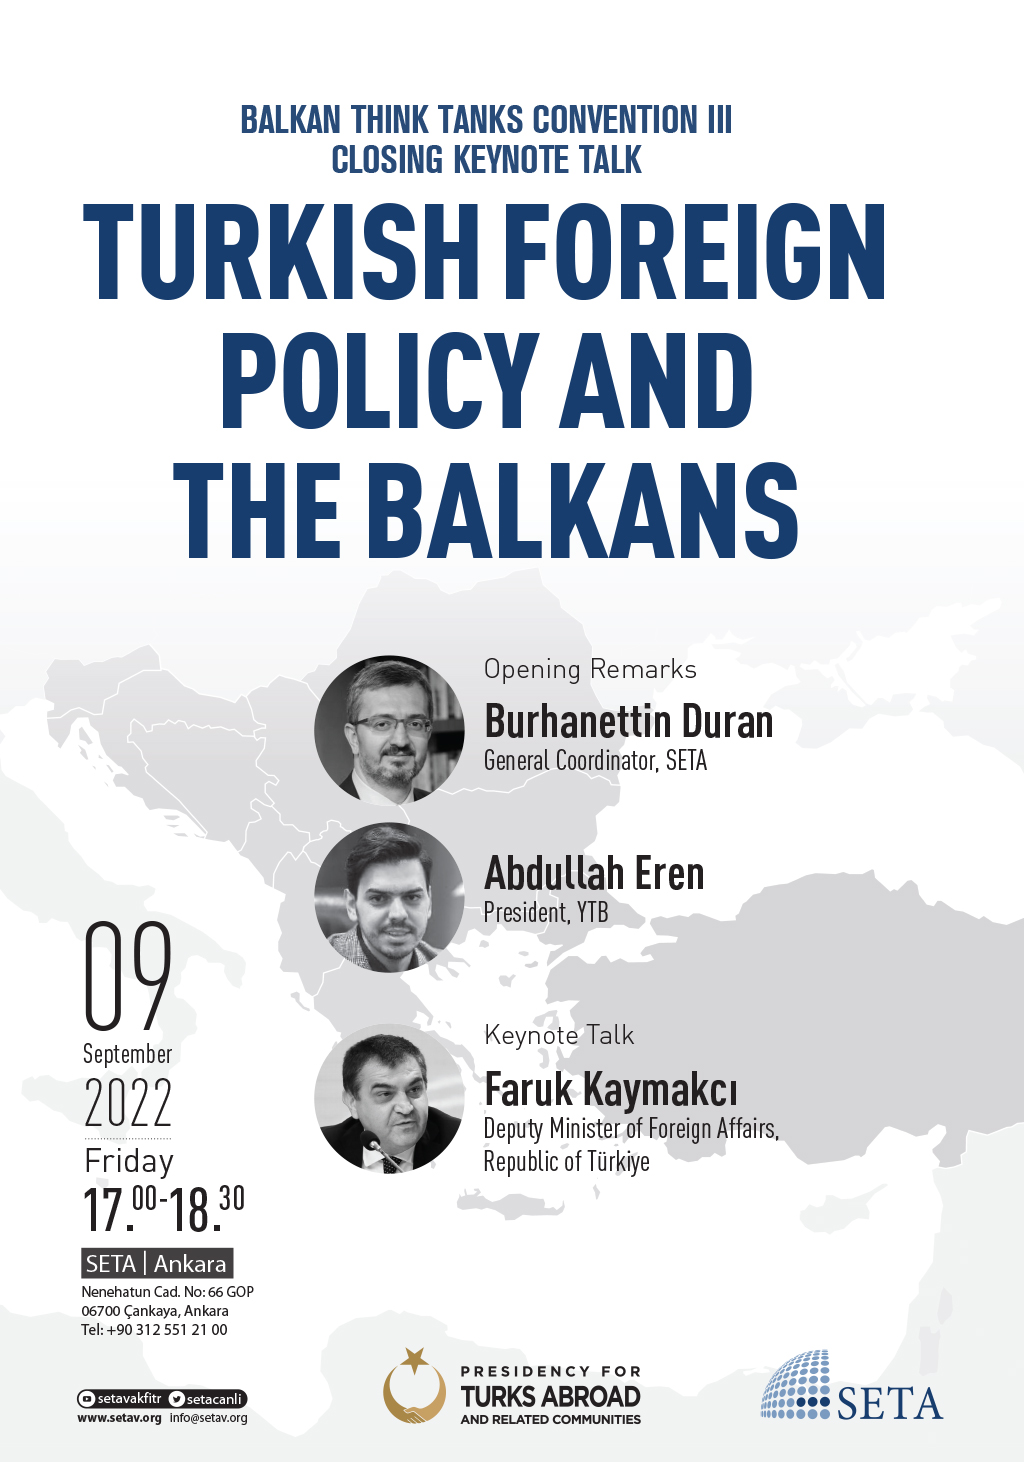 Keynote Talk: “Turkish Foreign Policy and the Balkans”